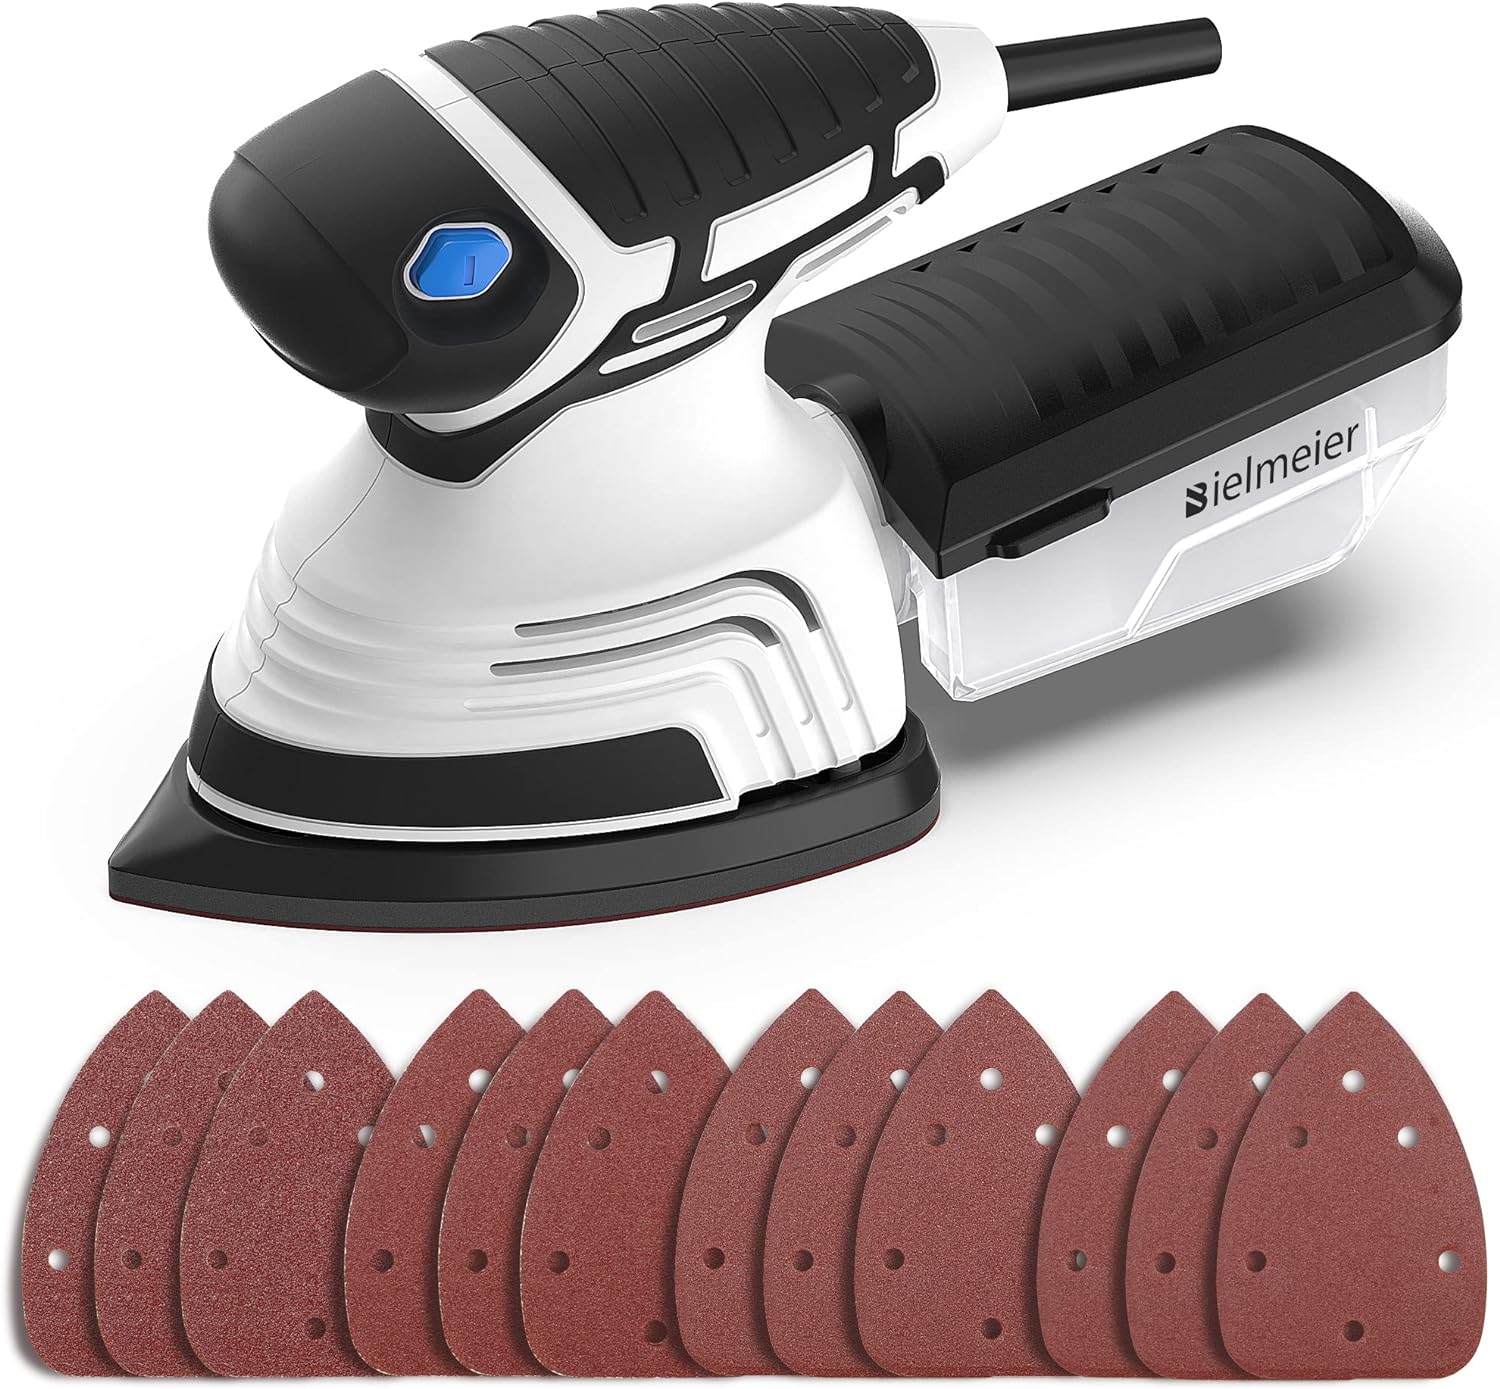 Bielmeier Detail Sander, Palm Sander with 12 Sandpapers and Dust Box,6Ft 14,000 OPM Corded Electric Sander for Woodworking